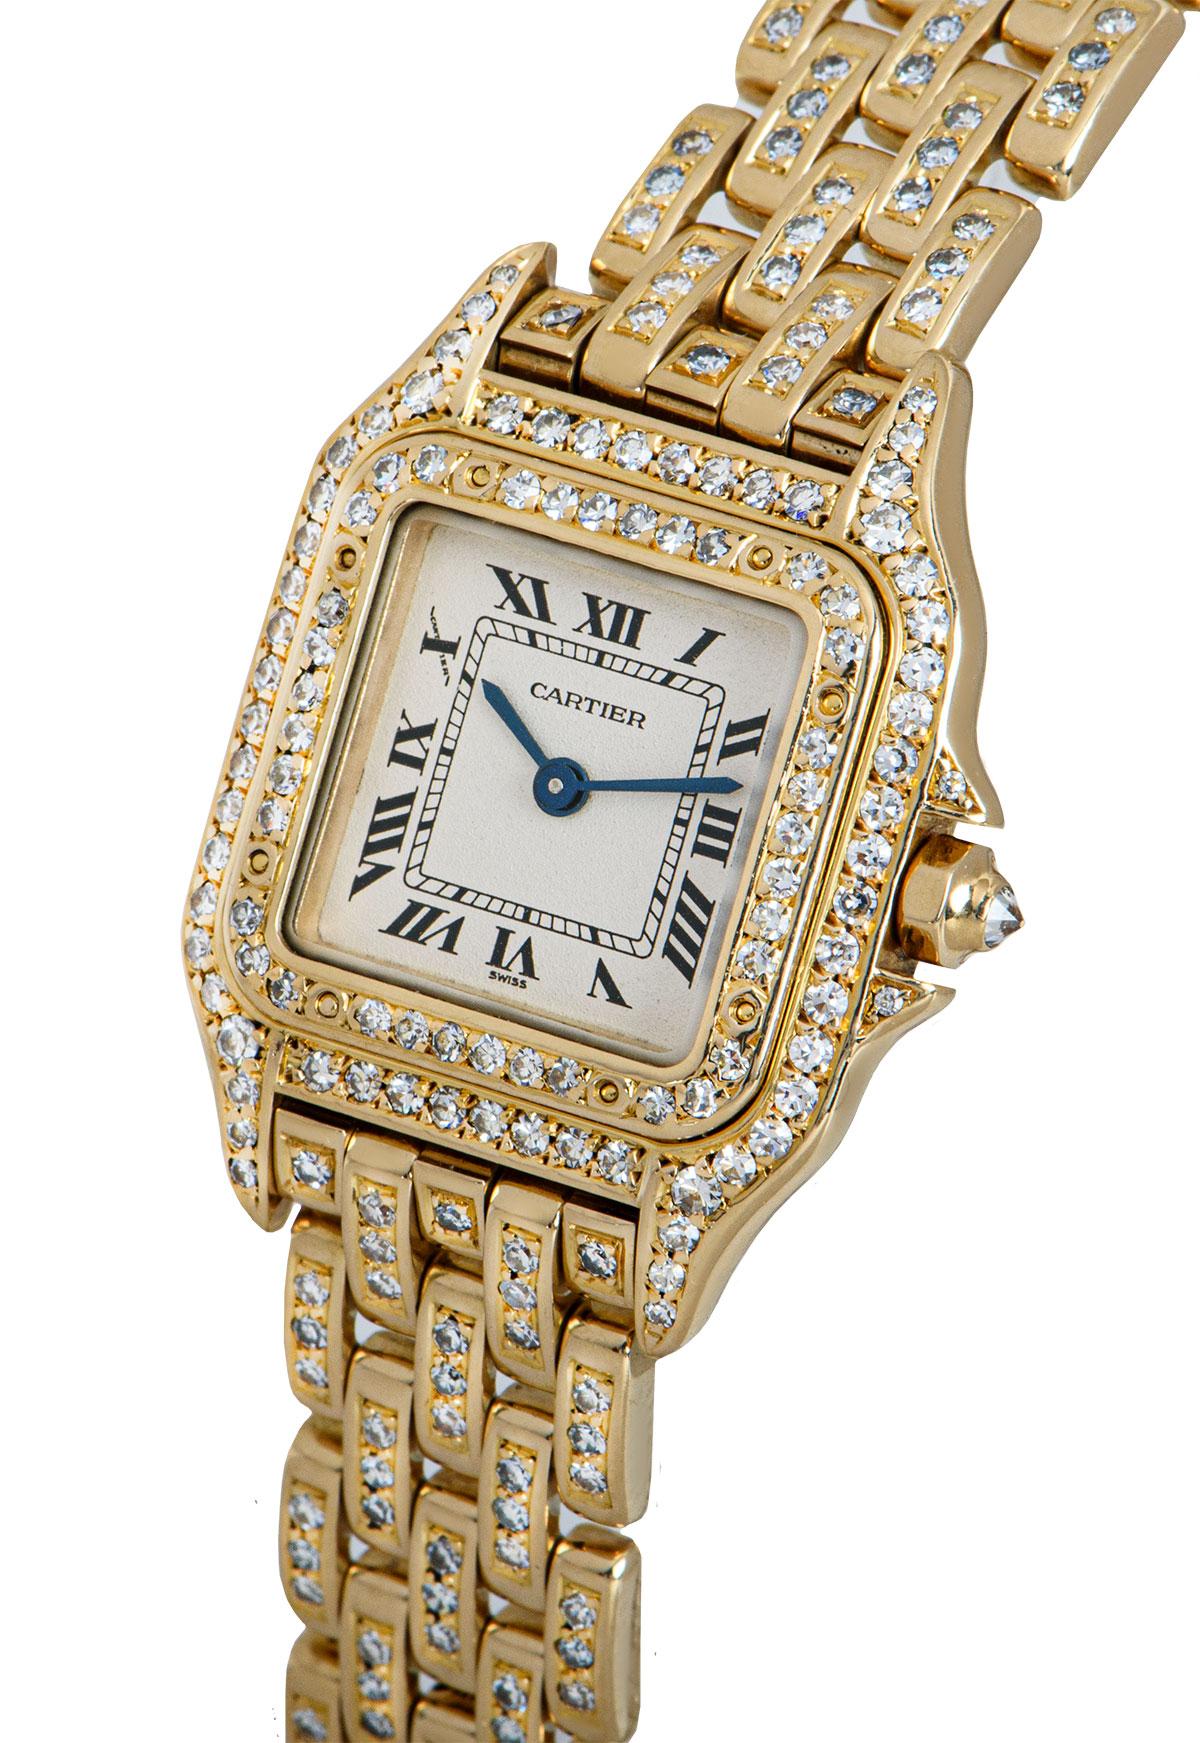 A 22 mm 18k Yellow Gold Panthere Fully Loaded Ladies Wristwatch, silver dial with roman numerals and a secret signature at X, sword shaped hands in blued steel, a fixed 18k yellow gold bezel set with 36 round brilliant cut diamonds, 18k yellow gold